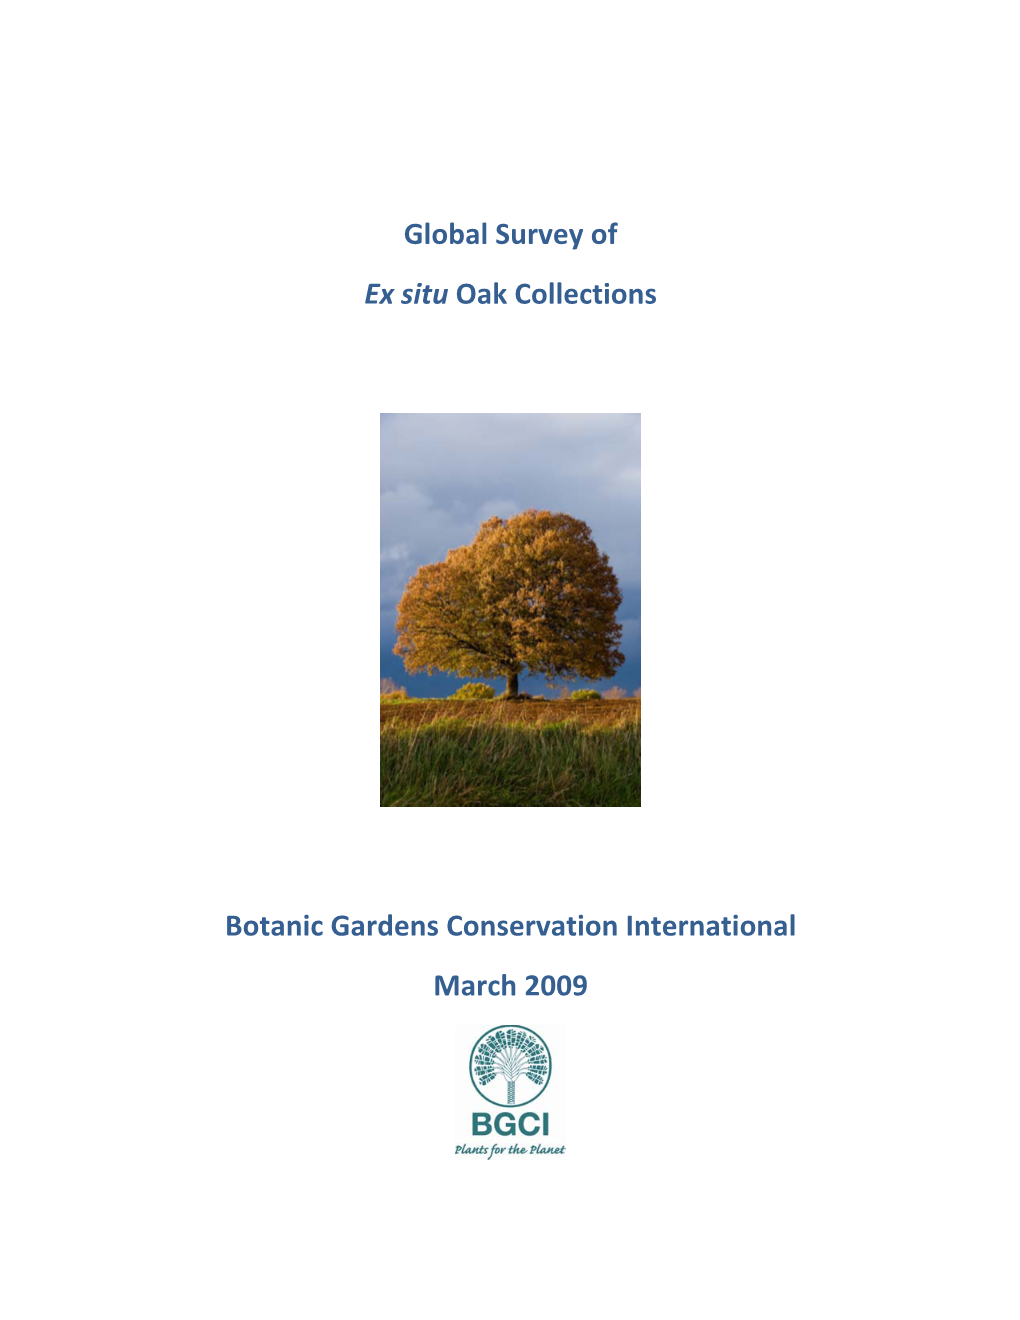 Global Survey of Ex Situ Oak Collections